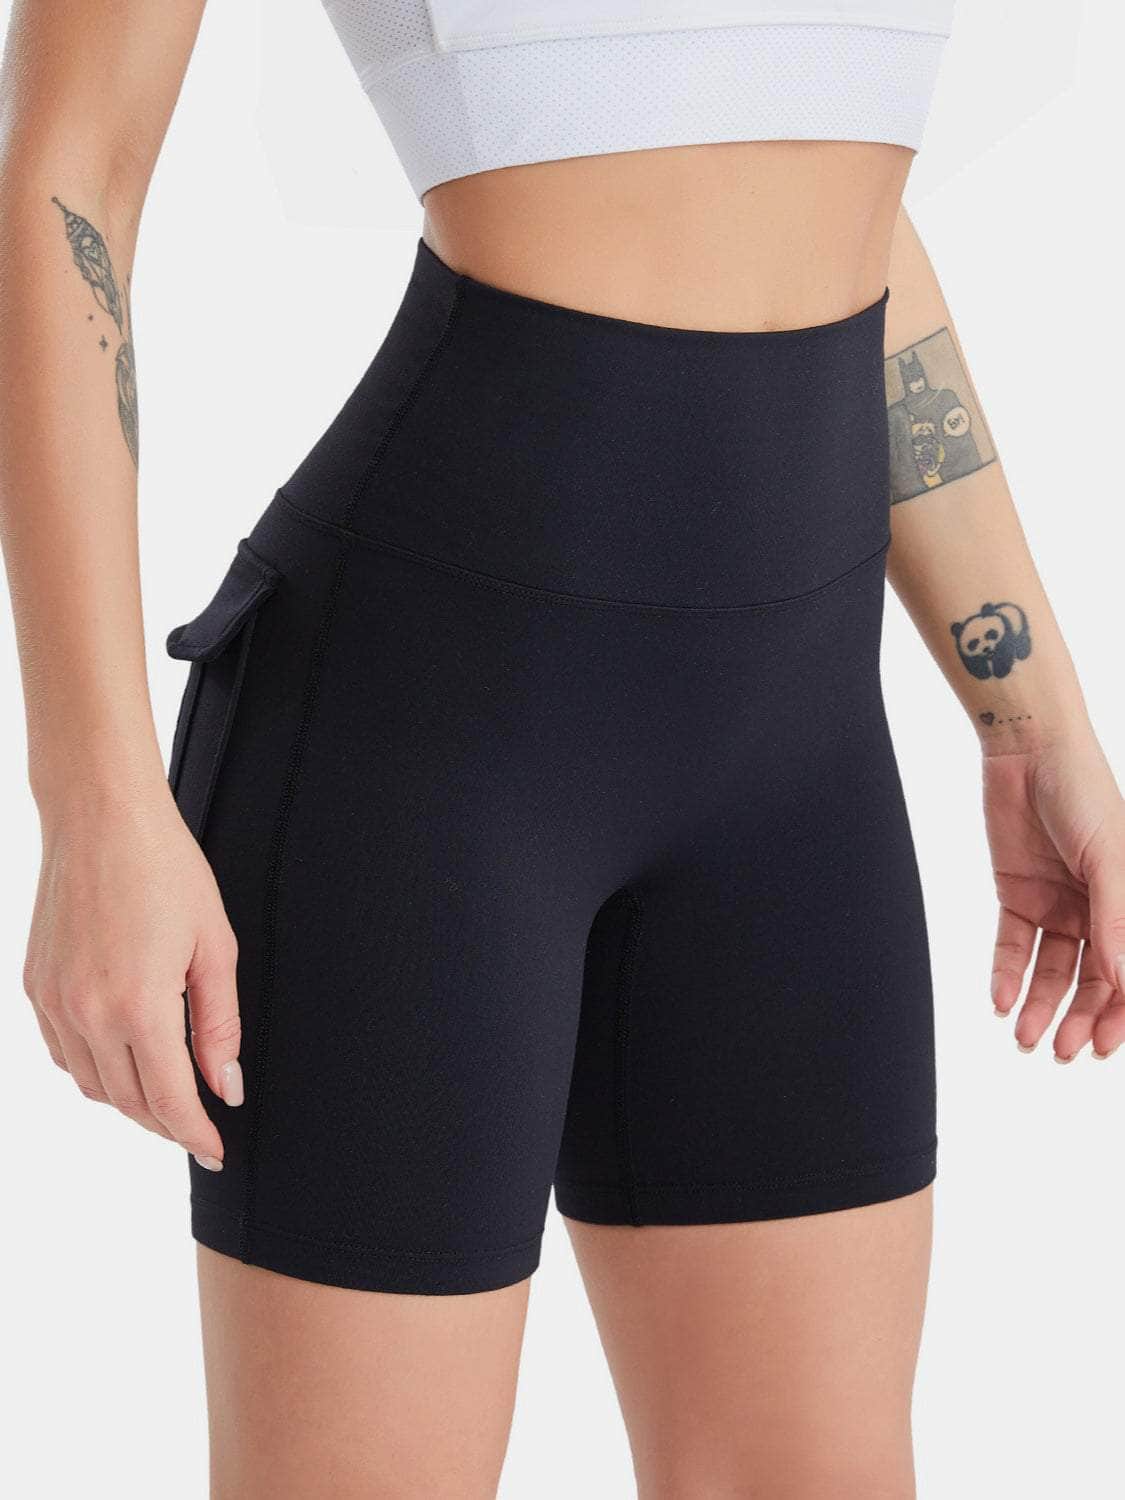 Pocketed High Waist Active Shorts Black / S